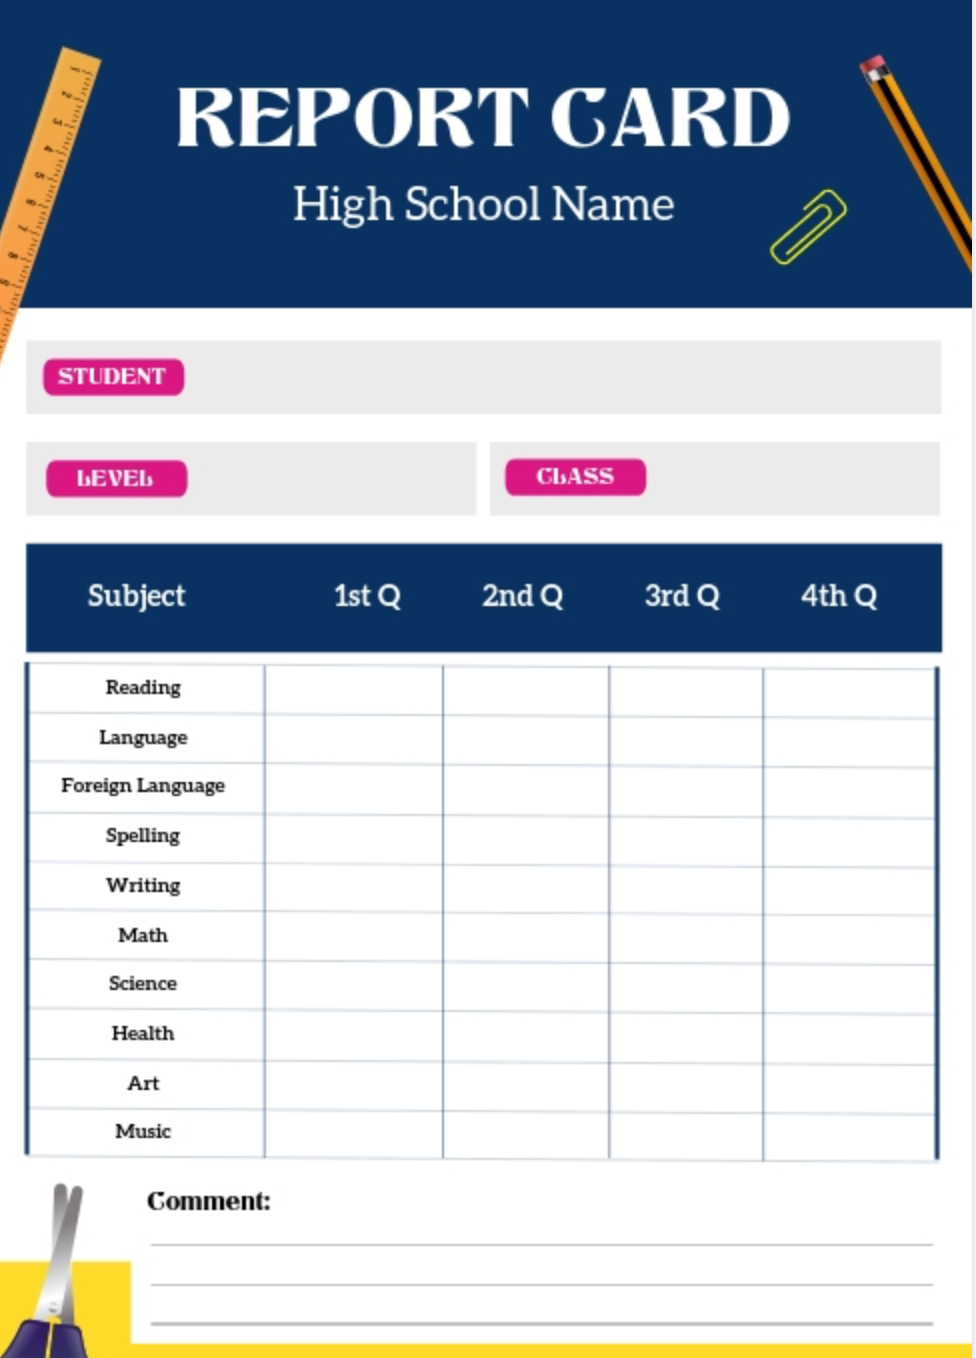 Report card Blank Template - Imgflip For Blank Report Card Template